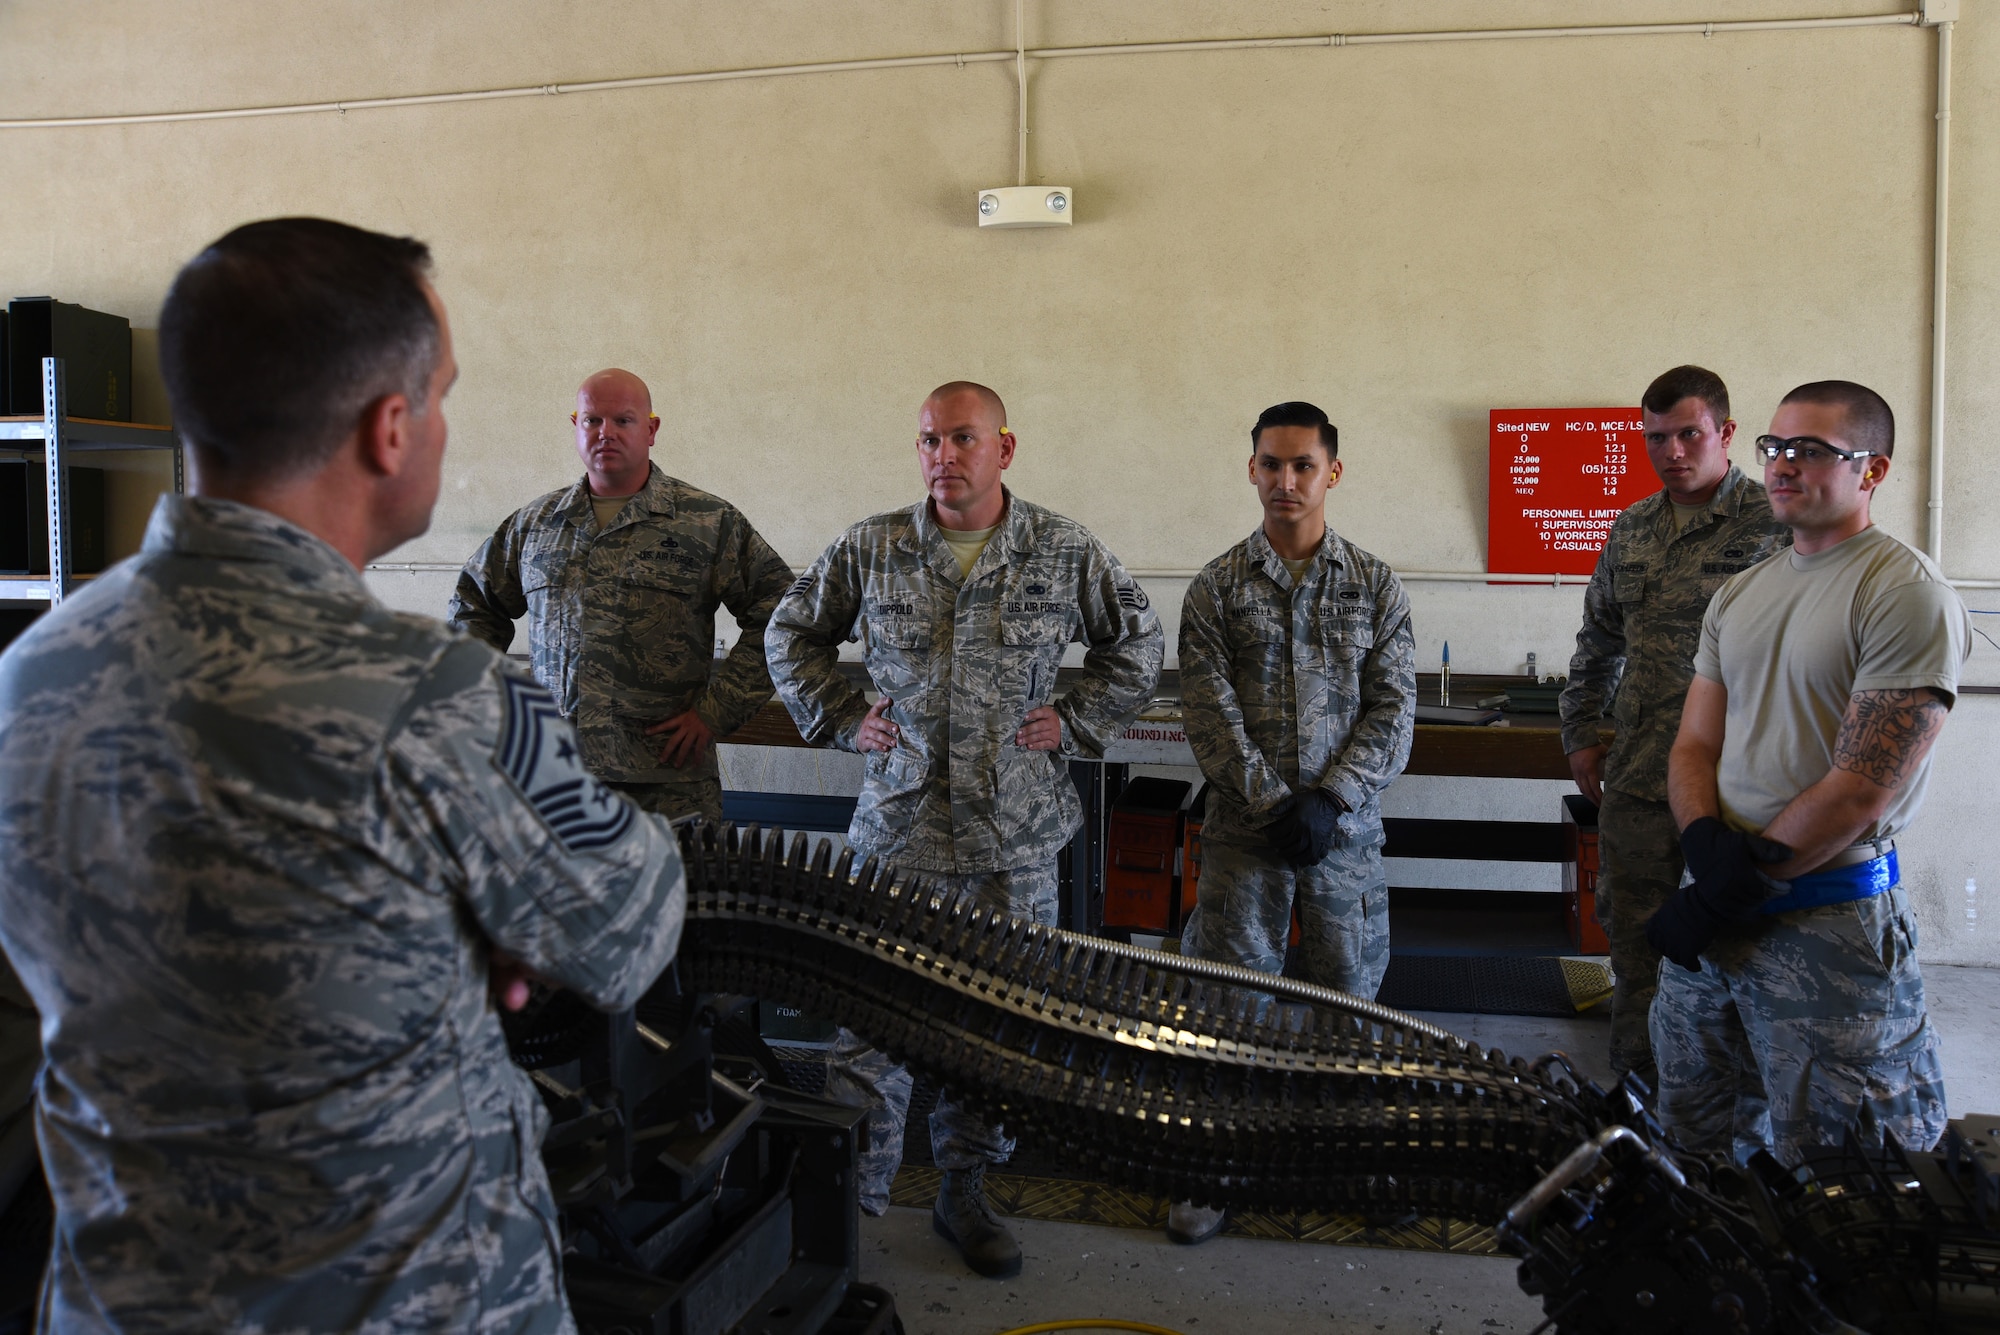 U.S. Air Force Chief Master Sgt. Daniel Hoglund, 20th Fighter Wing command chief, left, speaks with 20th Equipment Maintenance Squadron (EMS) conventional maintenance flight Airmen during a visit to their shop at Shaw Air Force Base, S.C., July 10, 2018.